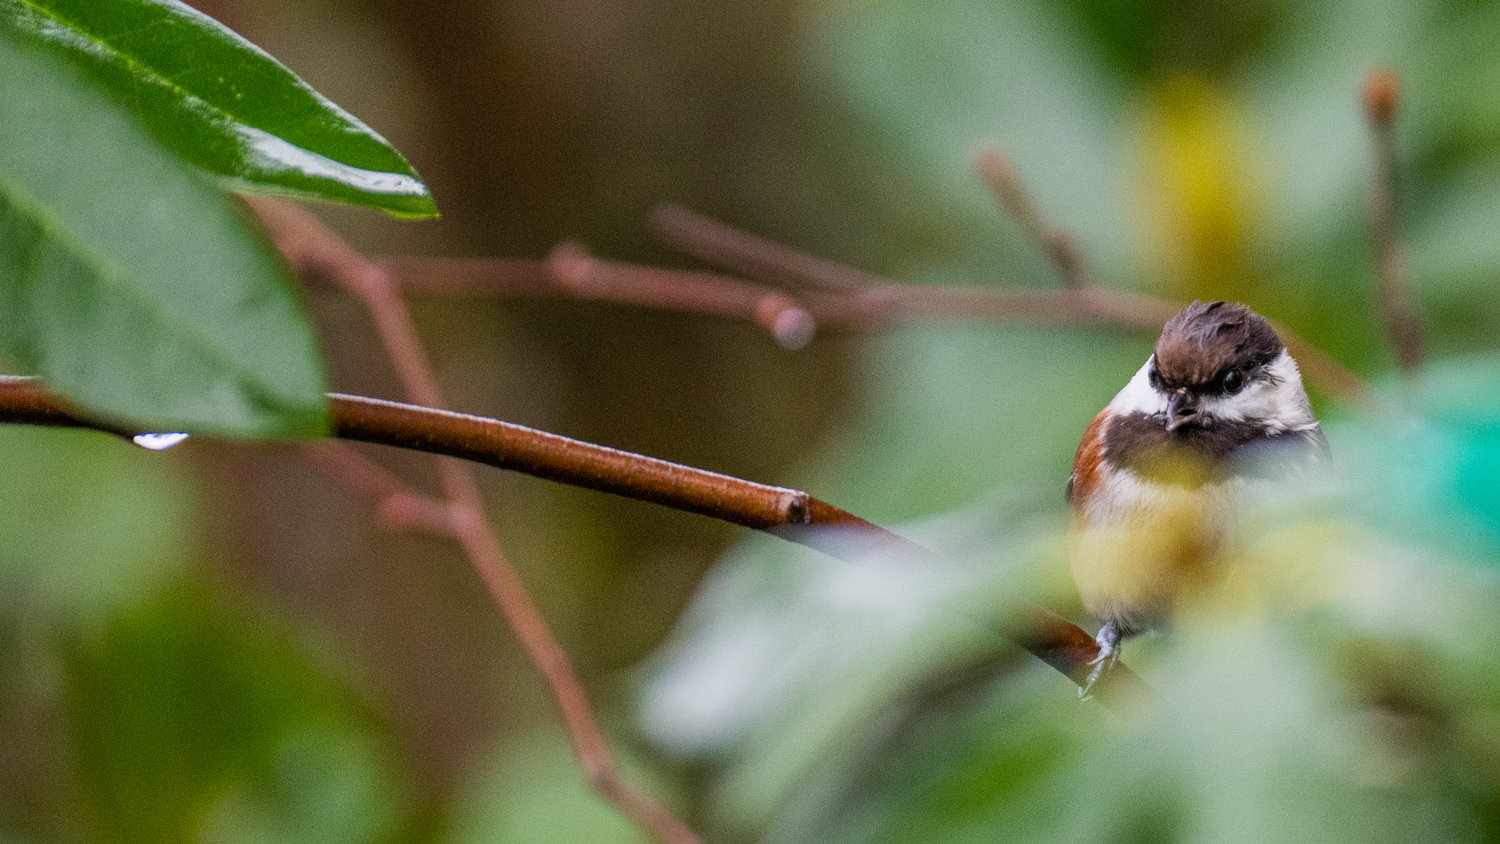 A chickadee trills on a rhododendron branch in Chehalis on Saturday. This photo was taken with a 300mm lens, which has high zoom capability. The raindrop on the leaf in the left side of the picture provides reference for the bird’s small size.